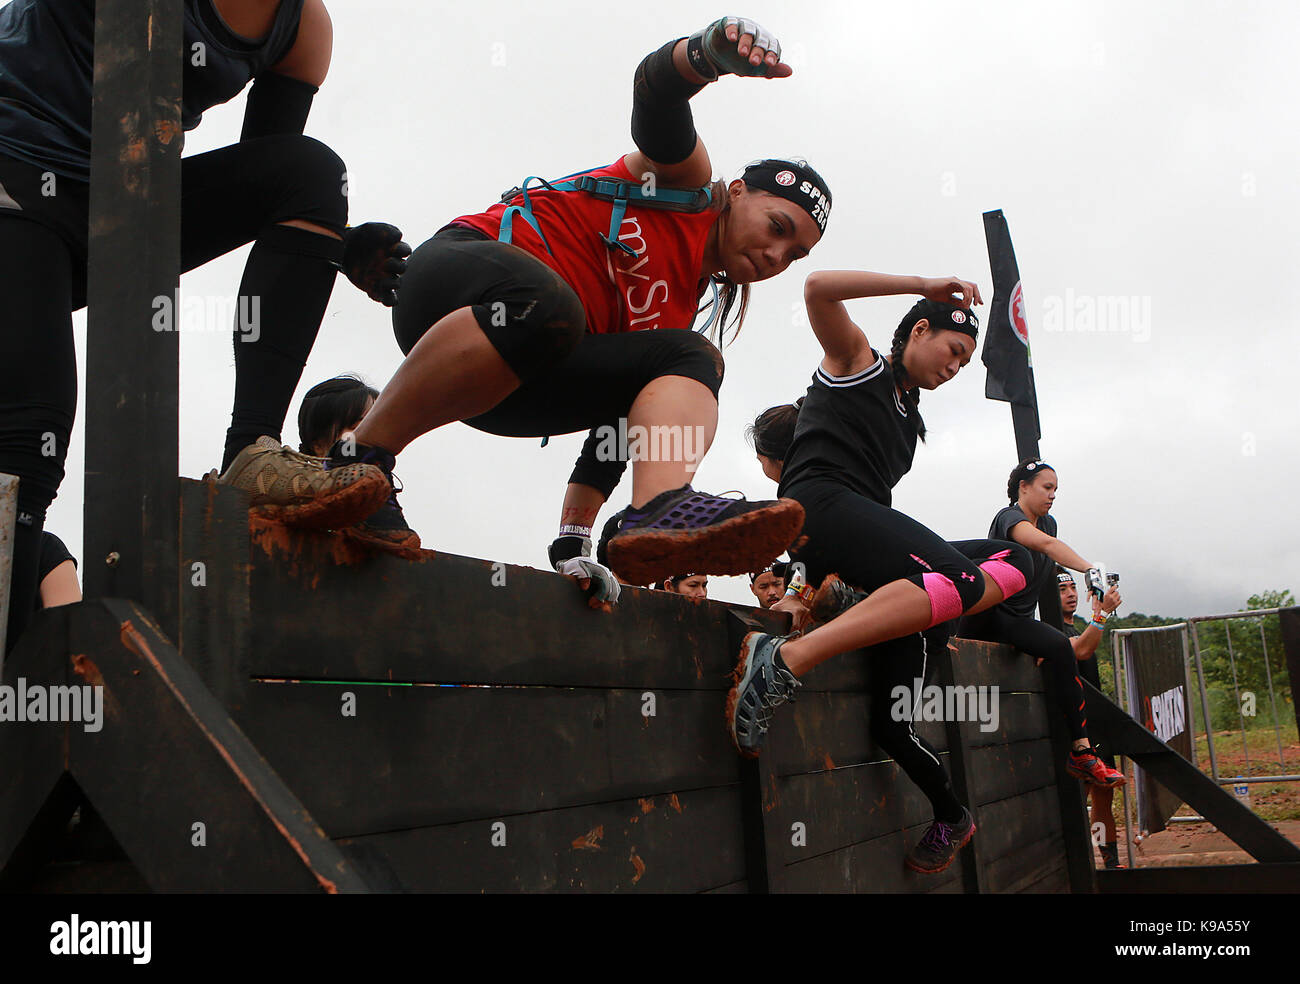 Rizal Province, Philippines. 23rd Sep, 2017. Female participants compete during the Spartan Race 2017 in Rizal Province, the Philippines, Sept. 23, 2017. Credit: Rouelle Umali/Xinhua/Alamy Live News Stock Photo